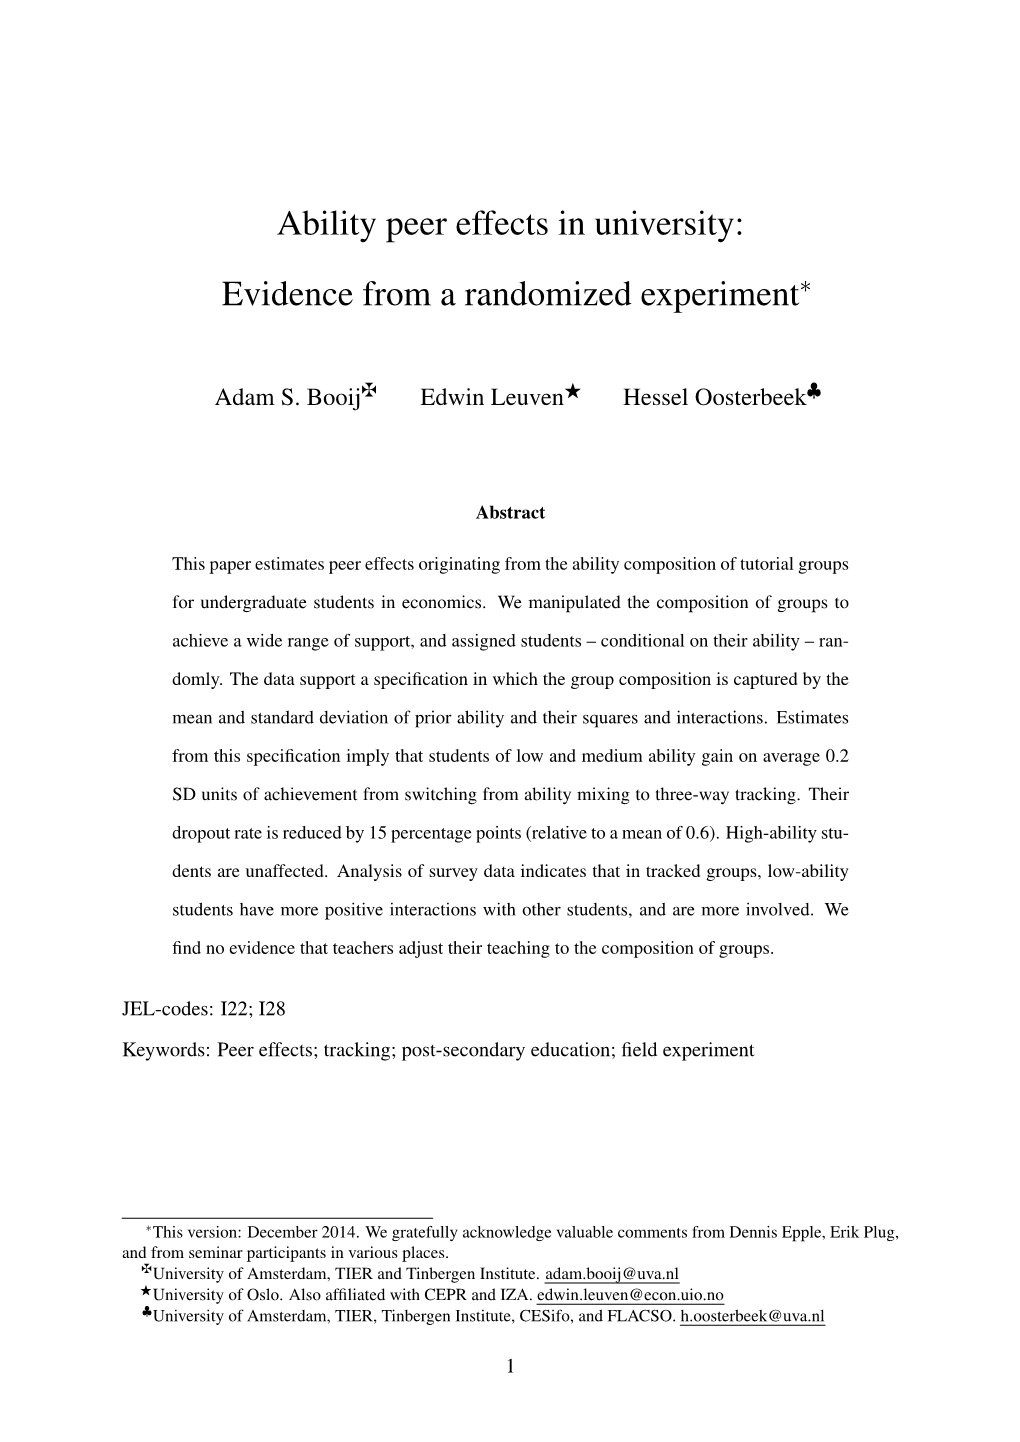 Ability Peer Effects in University: Evidence from a Randomized Experiment∗